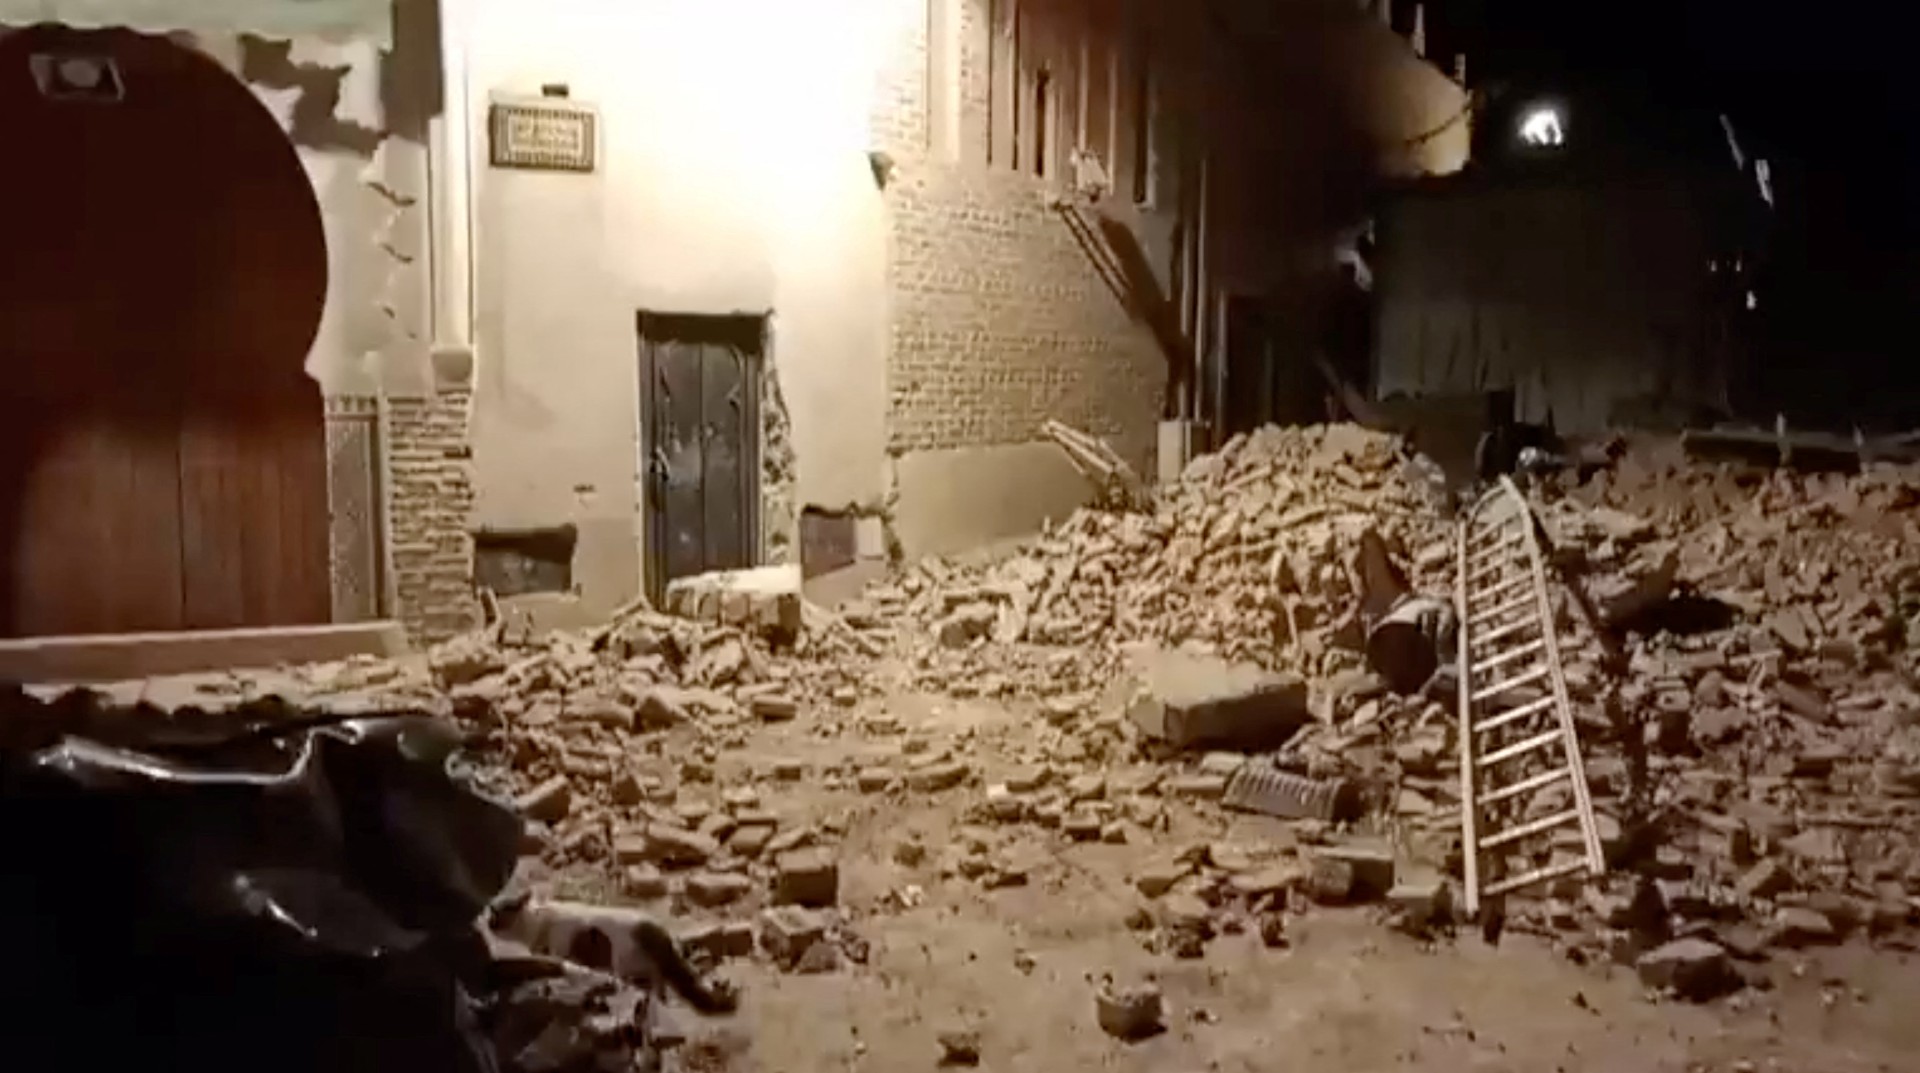 A view of debris in the aftermath of an earthquake in Marrakech (Reuters)